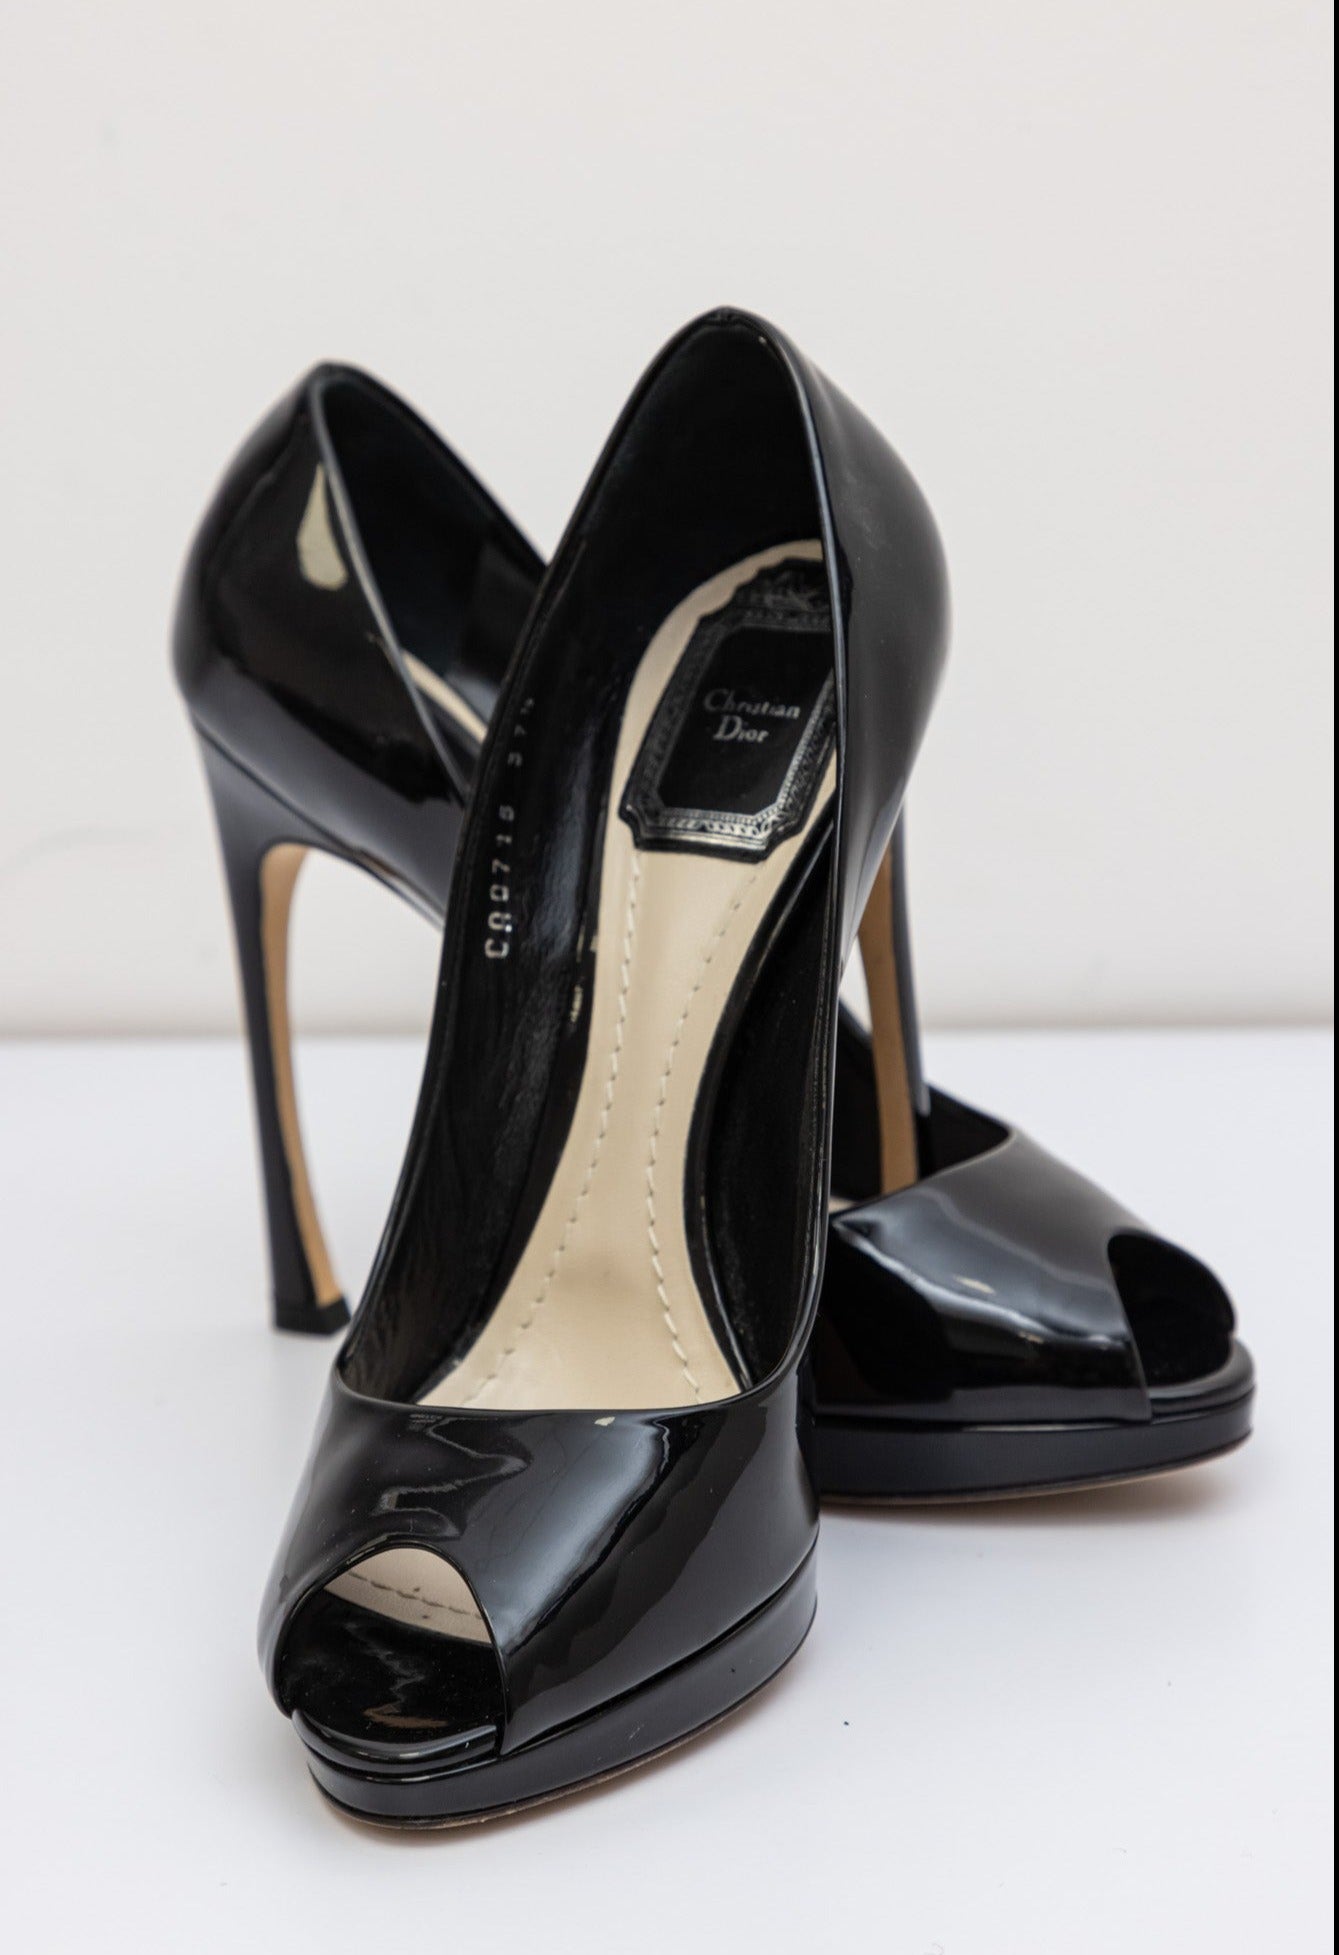 CHRISTIAN DIOR Black Leather Heels Shoes